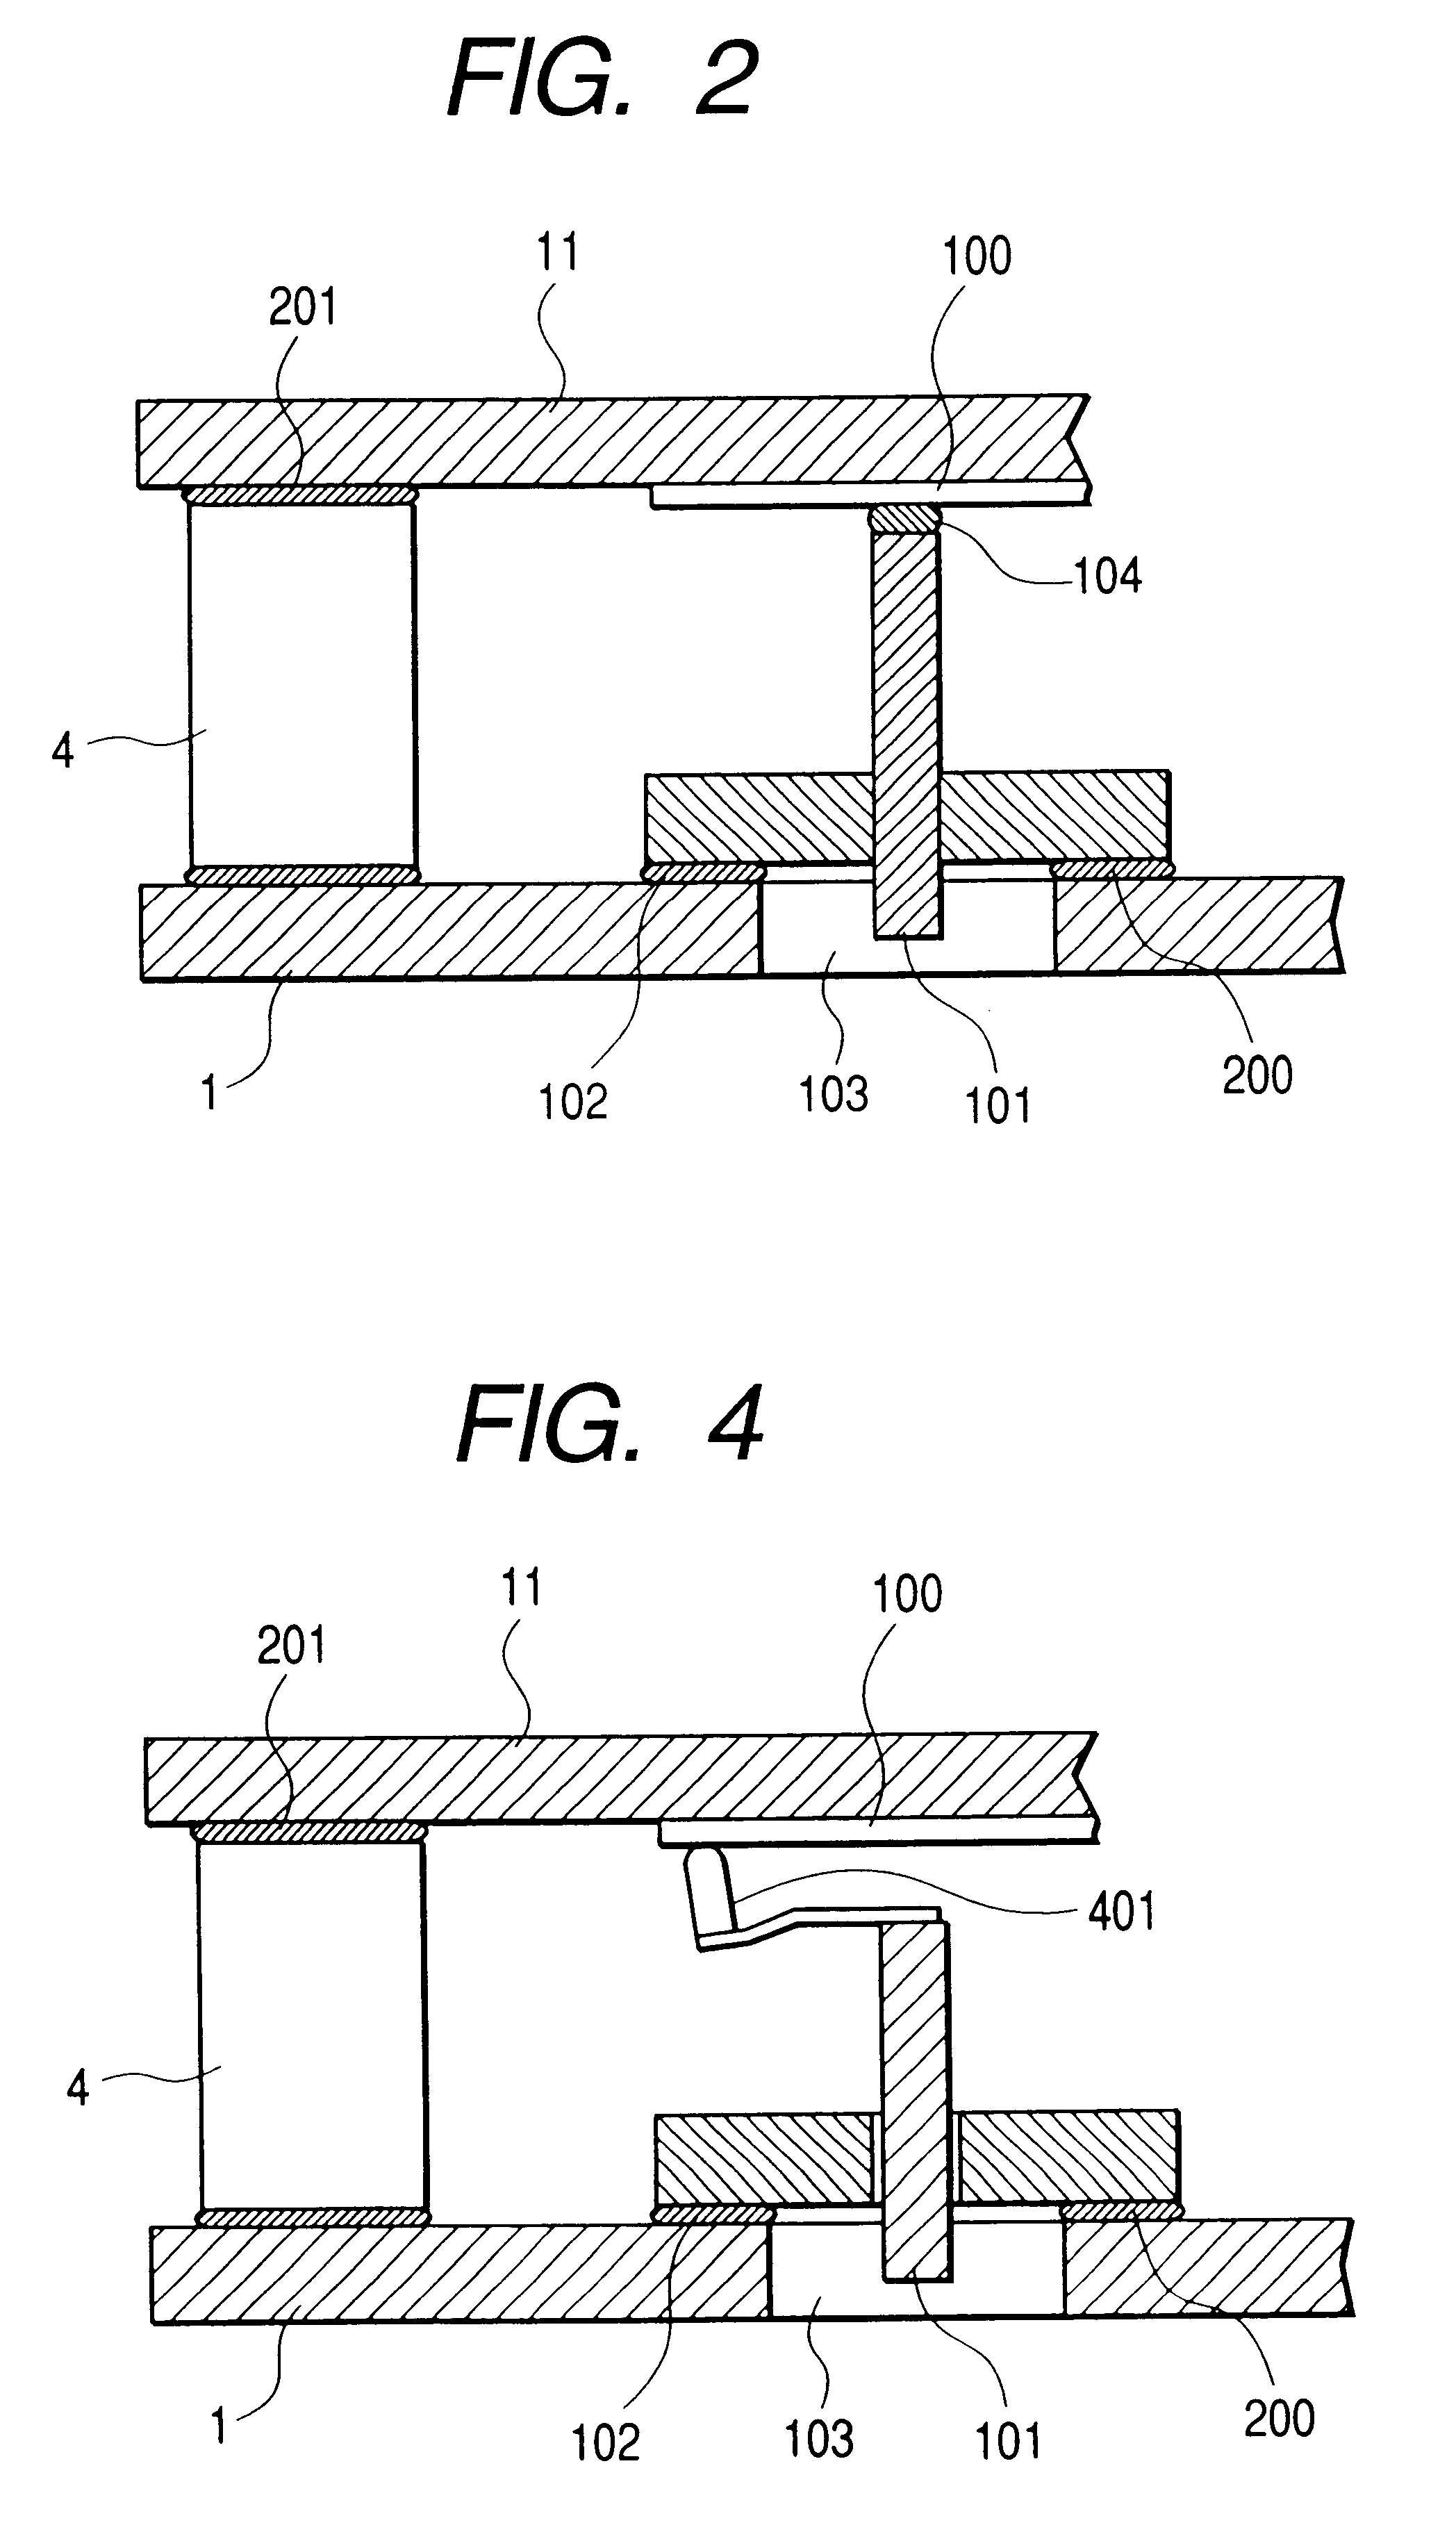 Image-forming apparatus and method of manufacture therefor